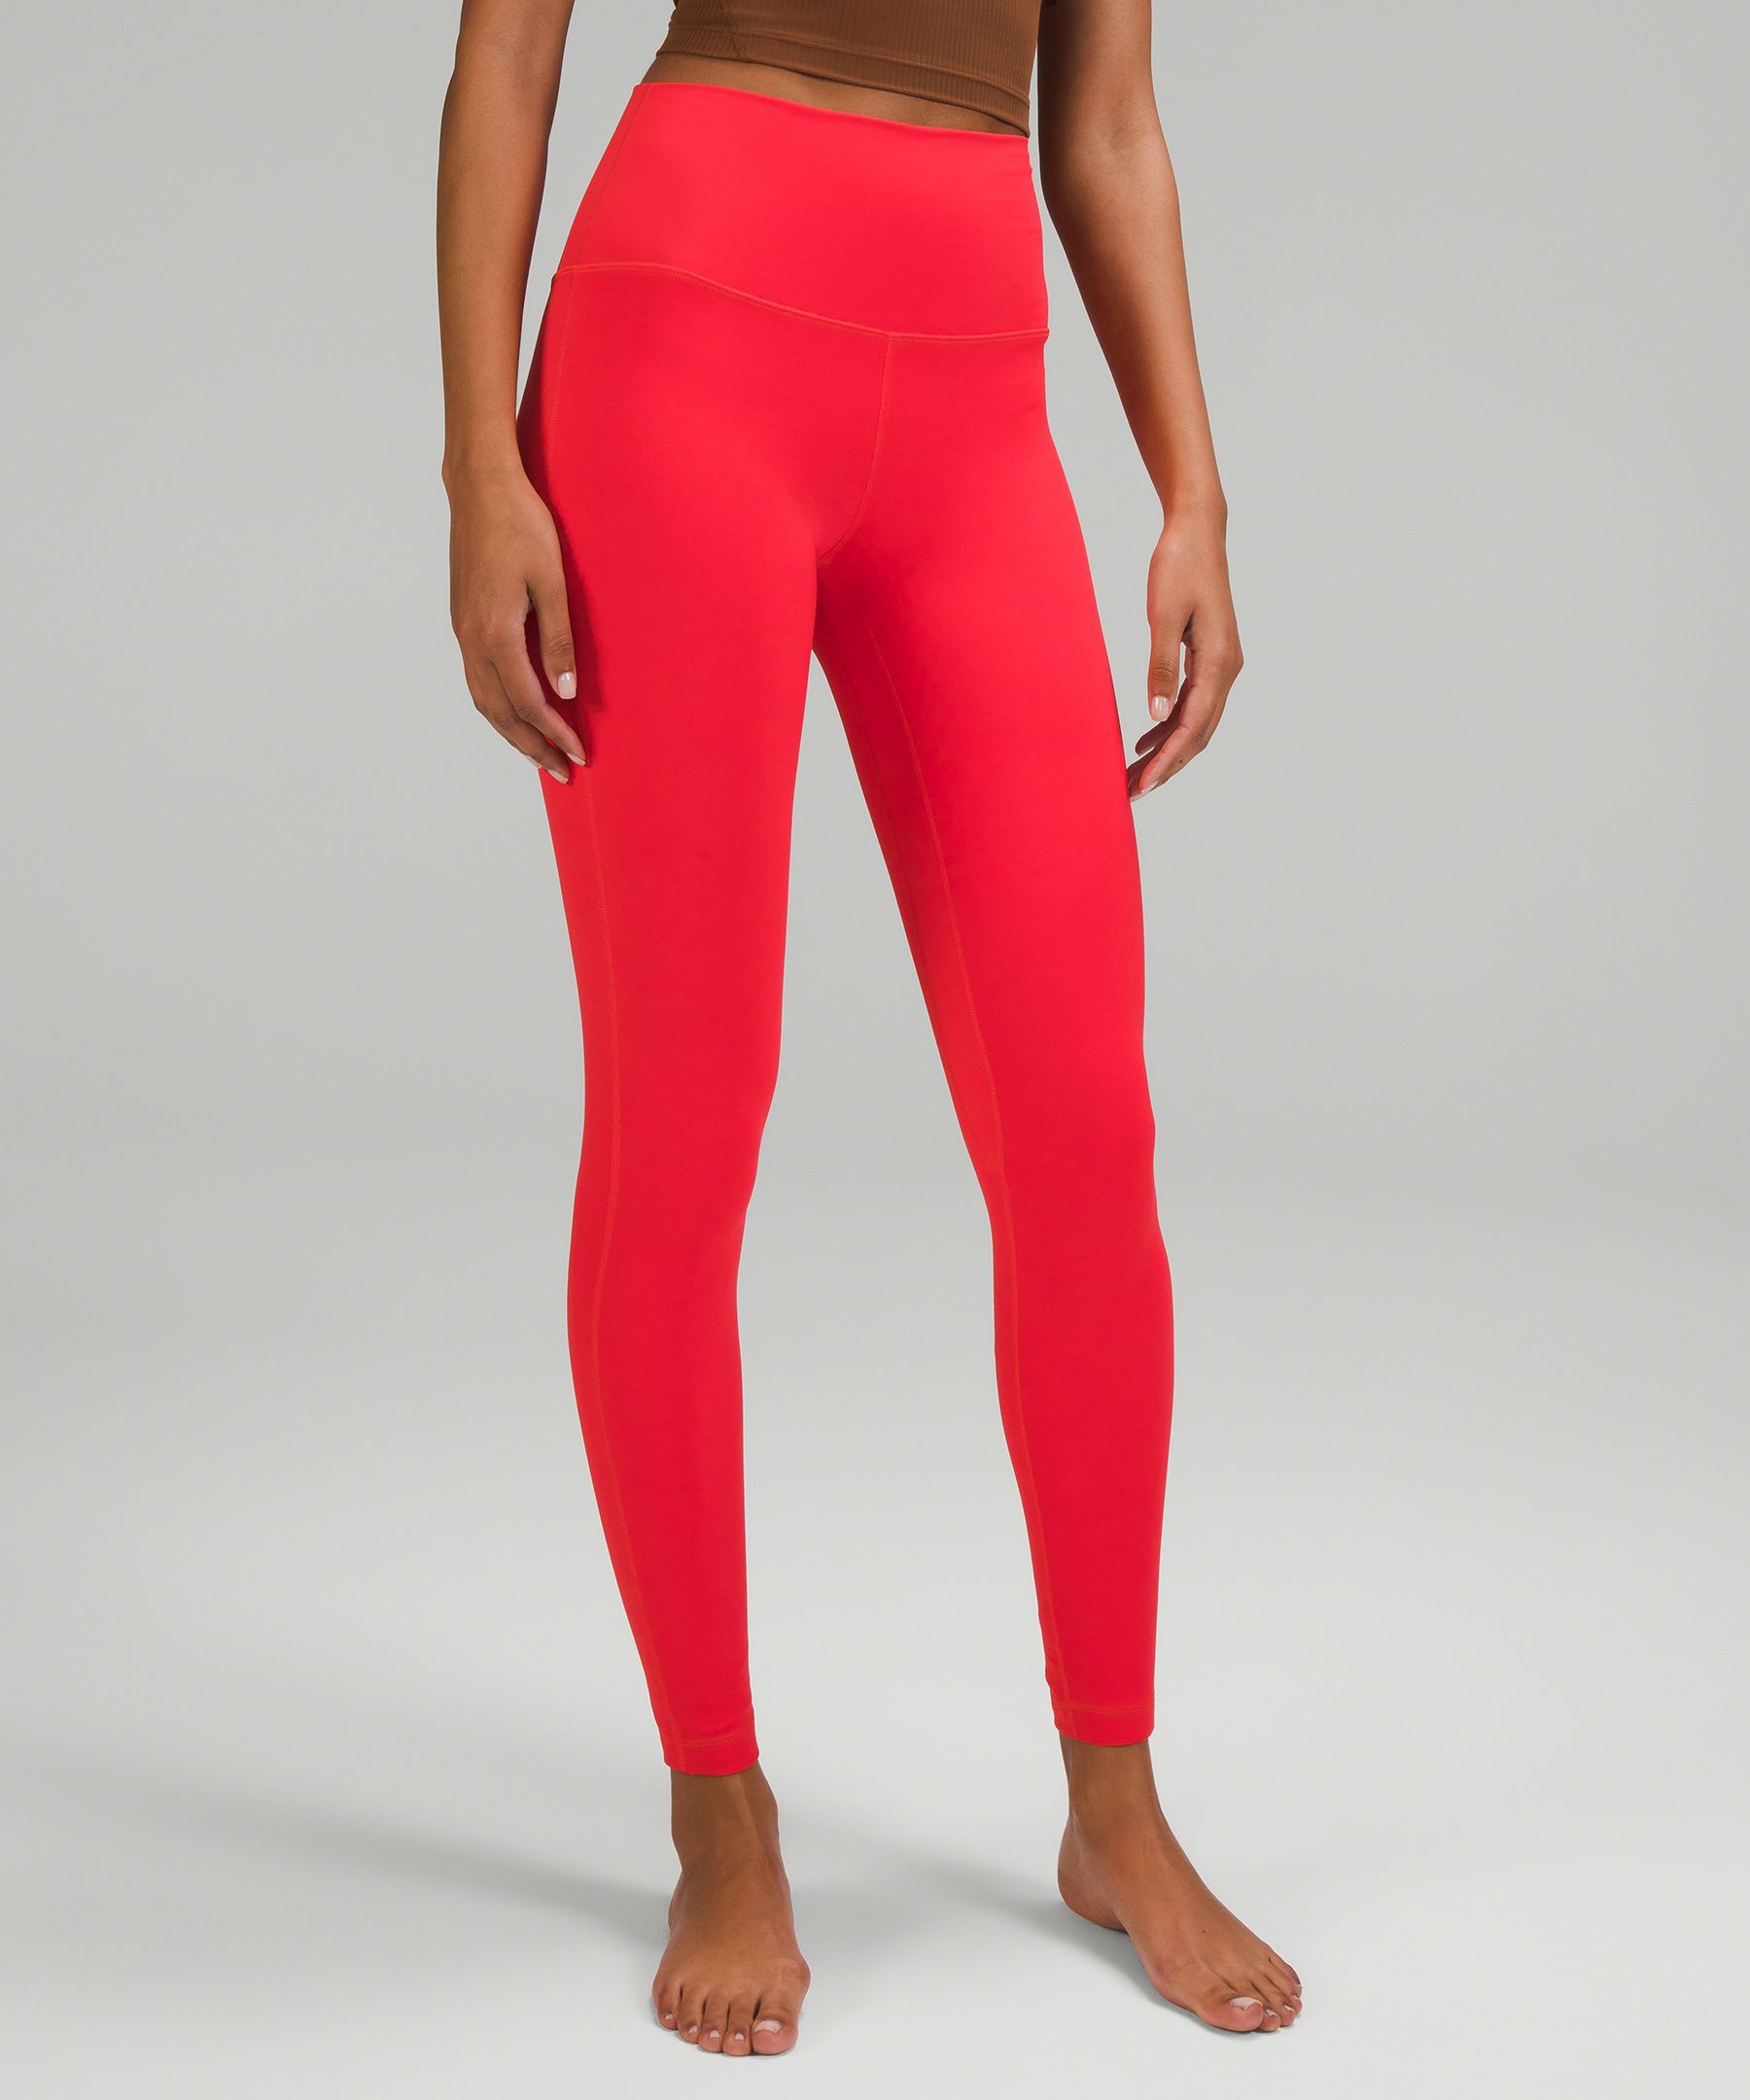 Best of Lululemon – Align Collection & Nulu Fabric Explained